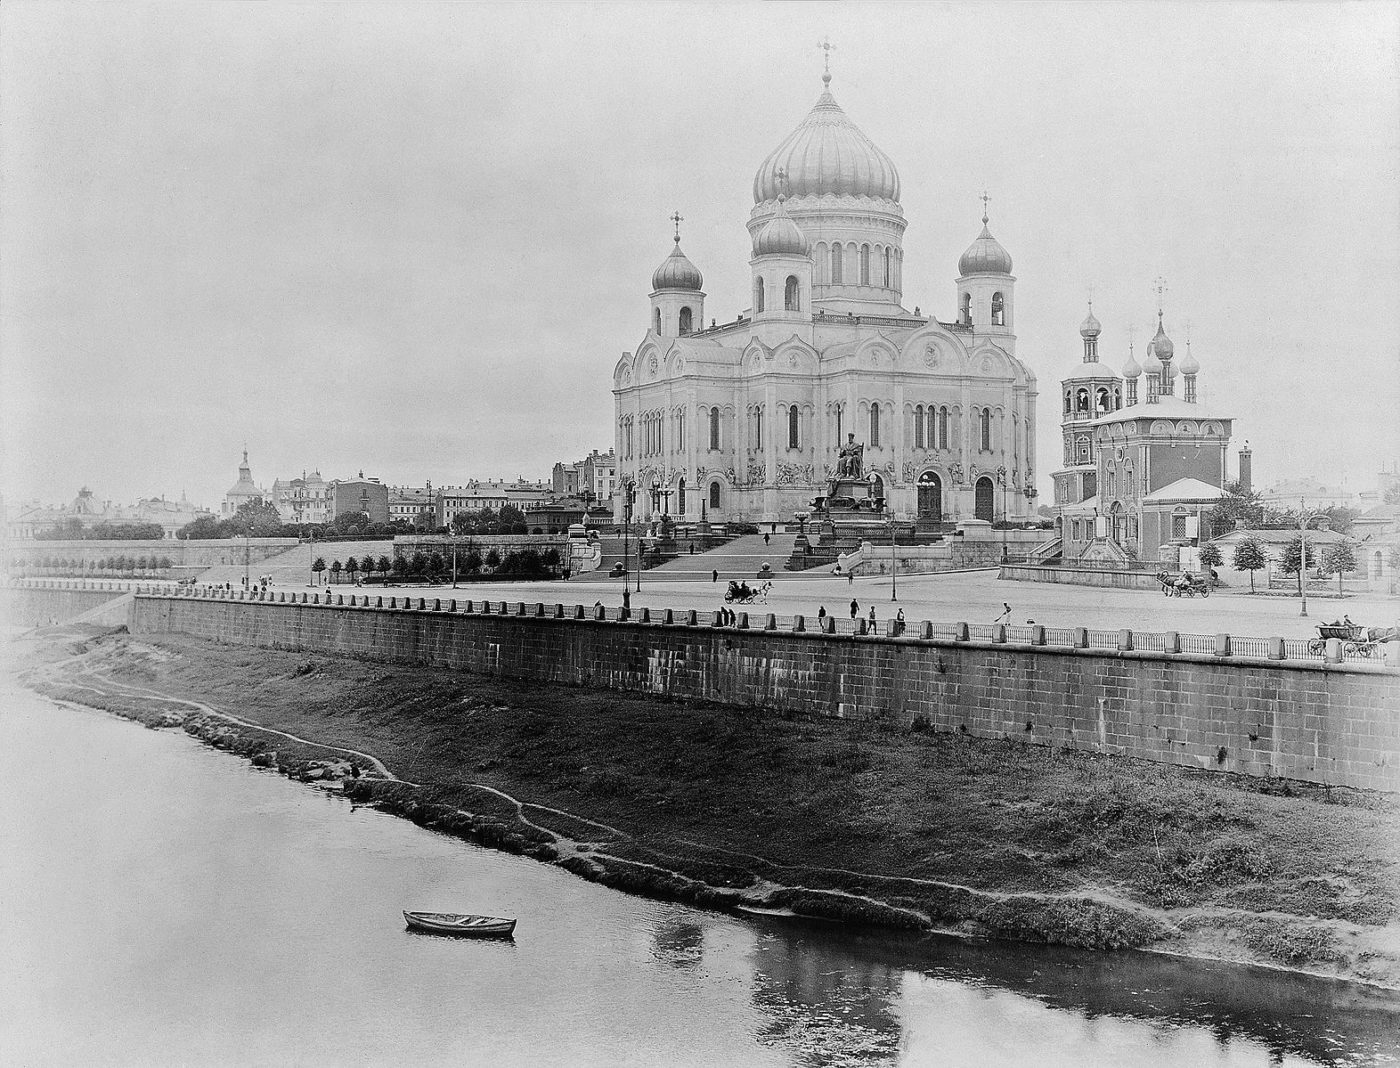 Black and White photo of the Cathedral of Christ Our Savior in early 1900s